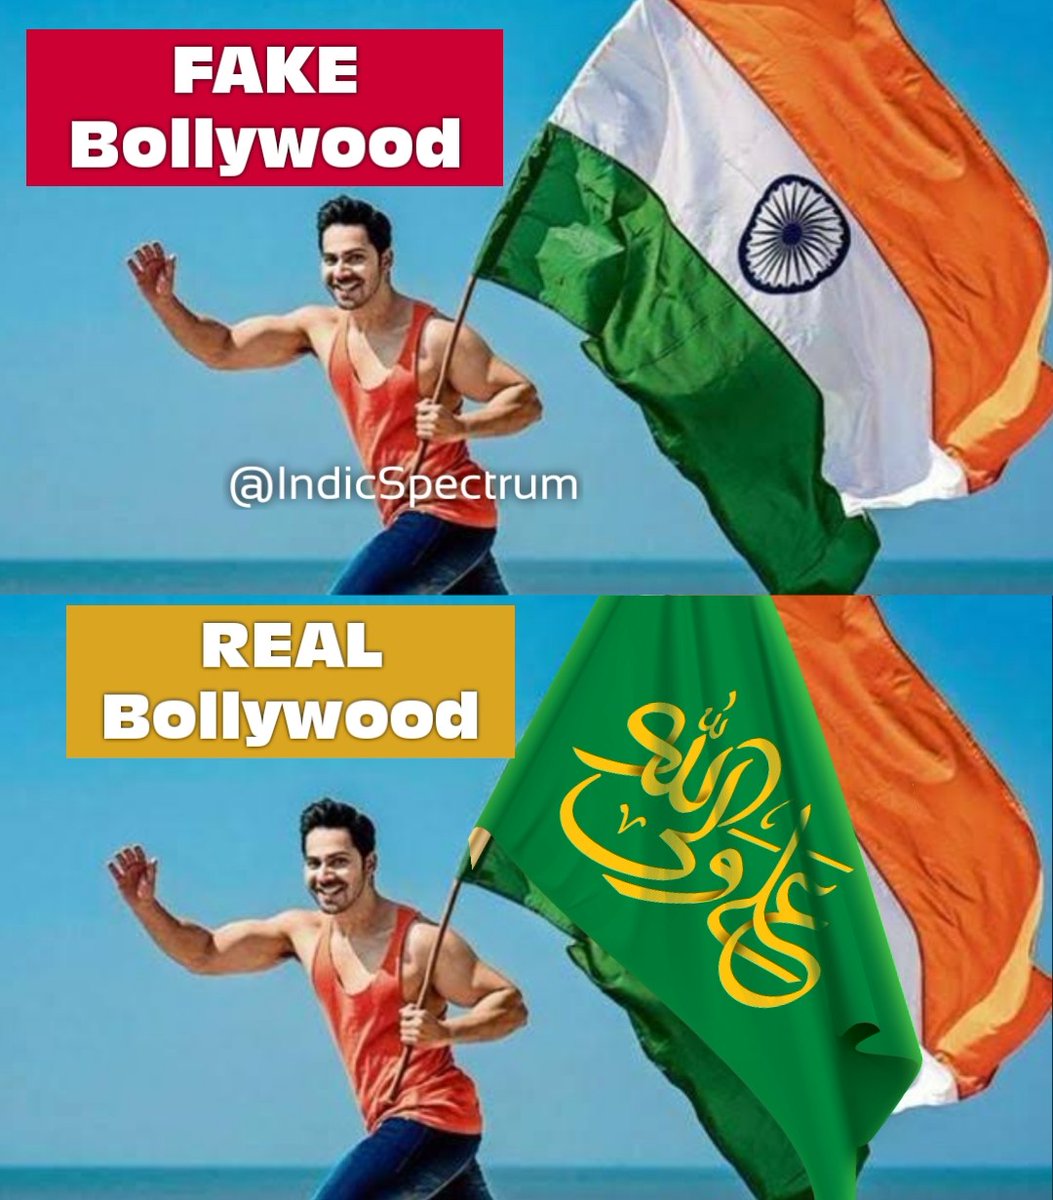 All Bollywood Bhaands are 0% Patriotic but 100% Anti-Nationals  

#BoycottBollywood

#IStandWithIsrael